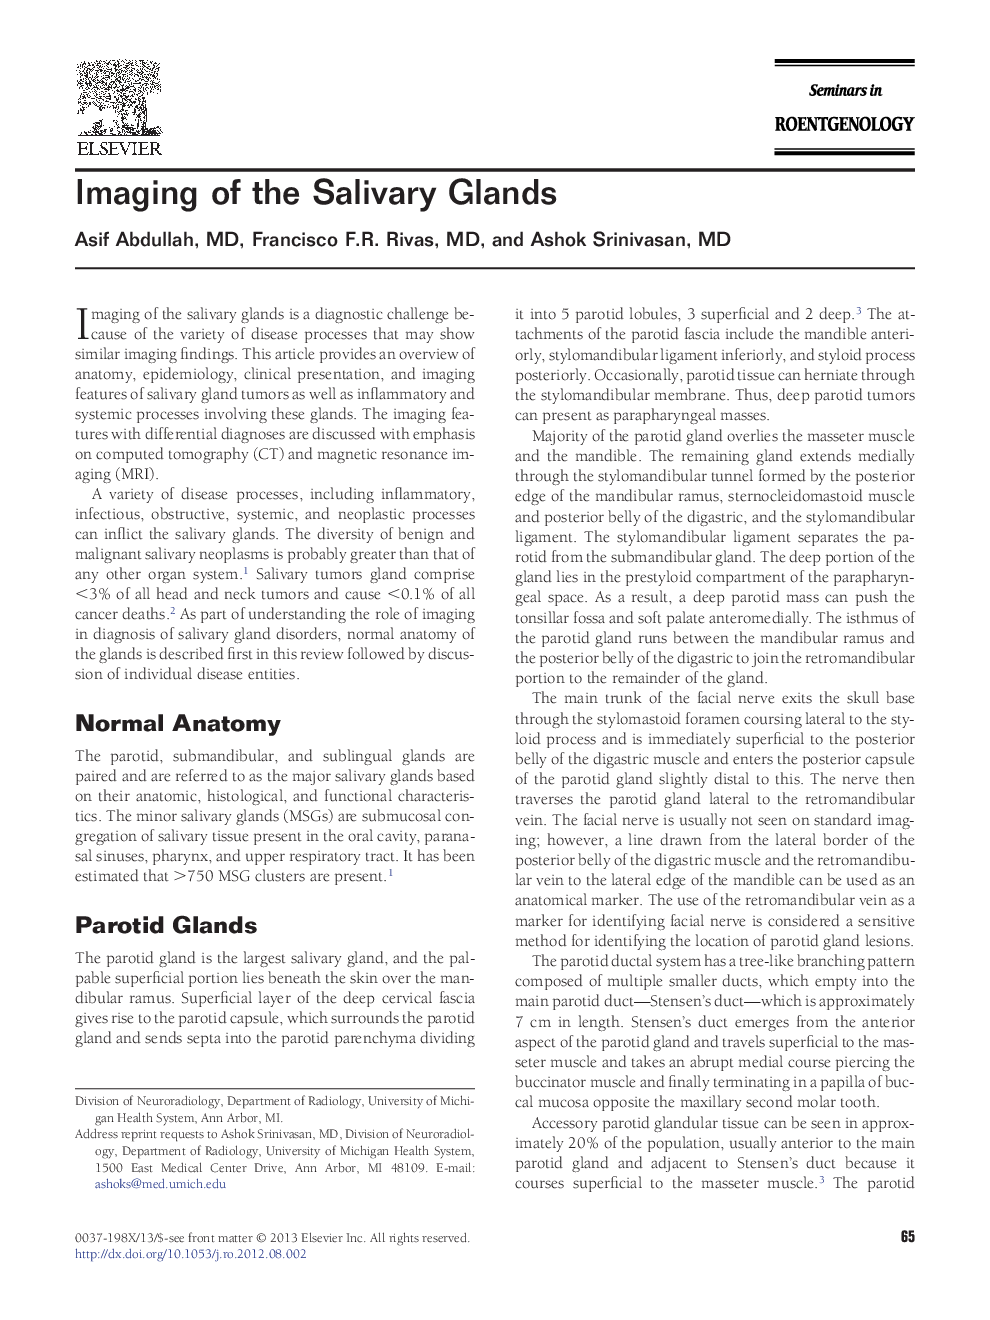 Imaging of the Salivary Glands